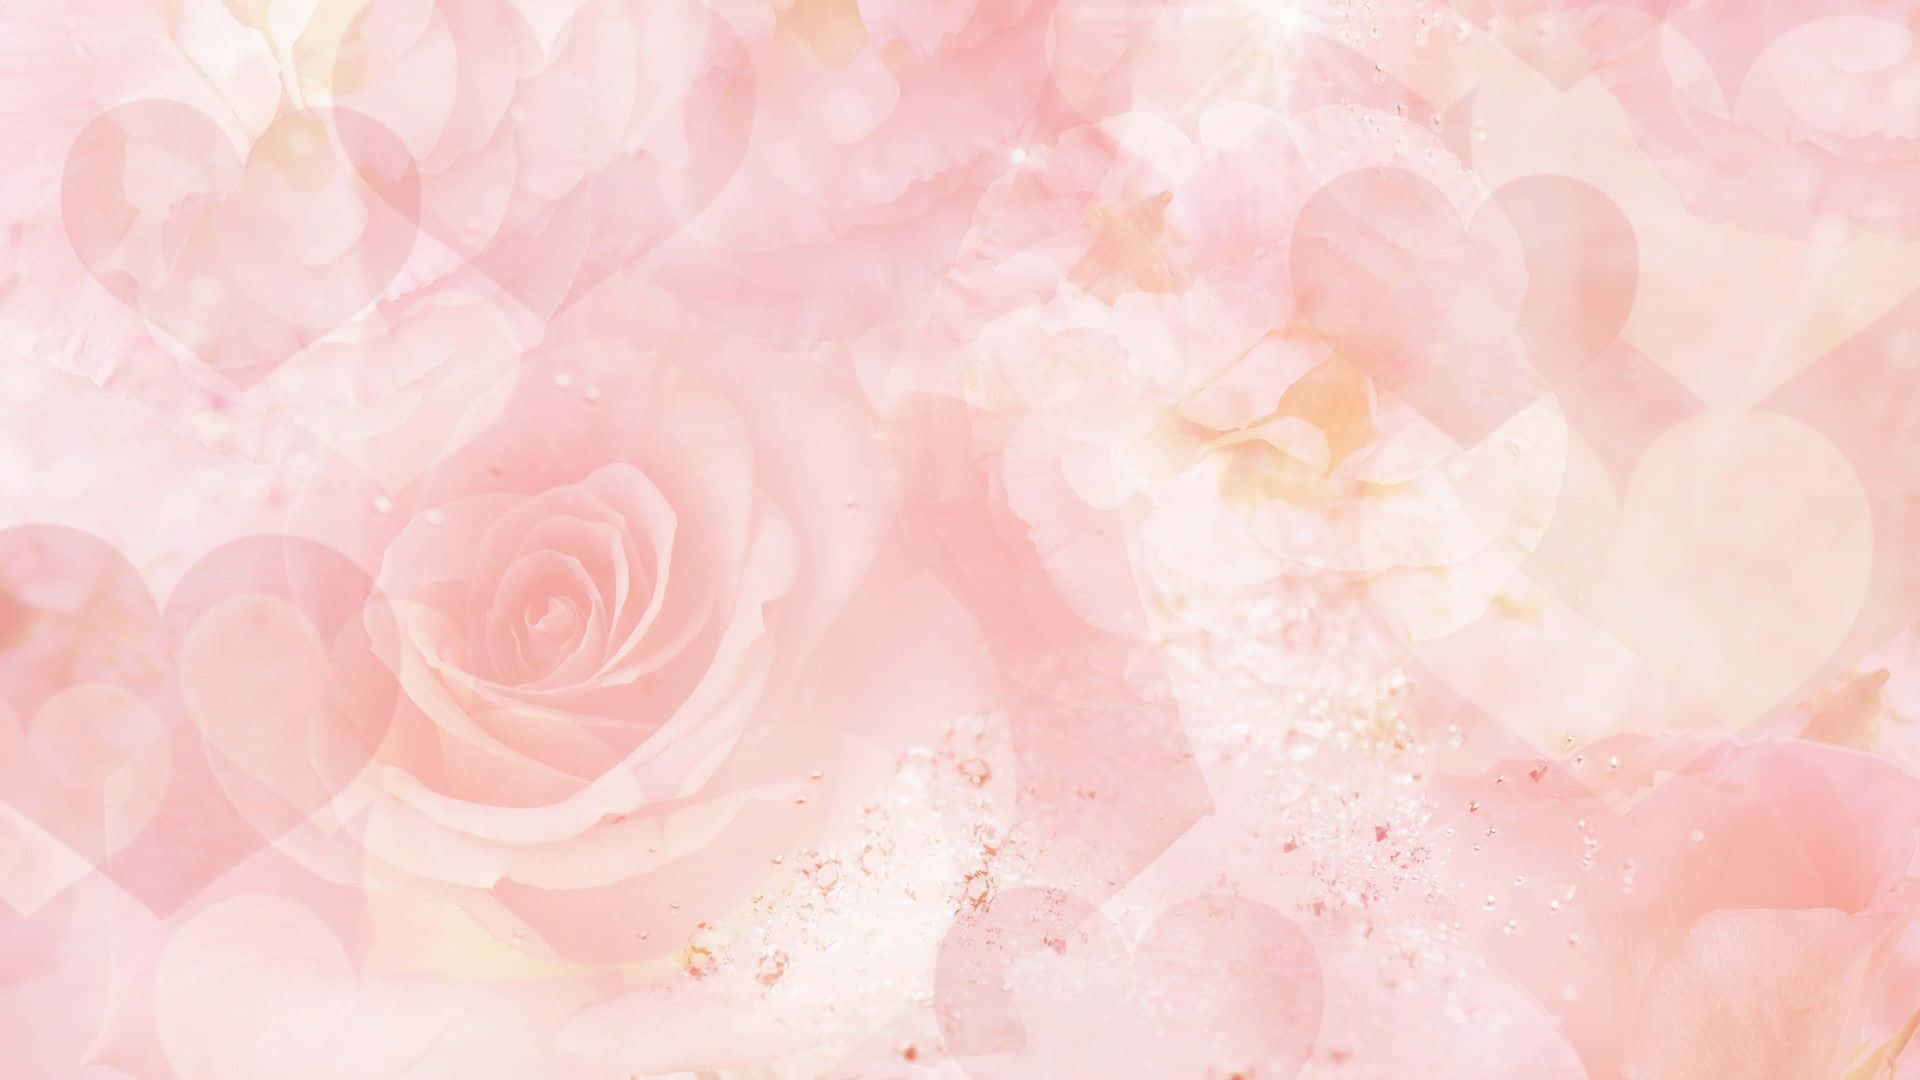 Pink Roses And Hearts On A Pink Background Wallpaper